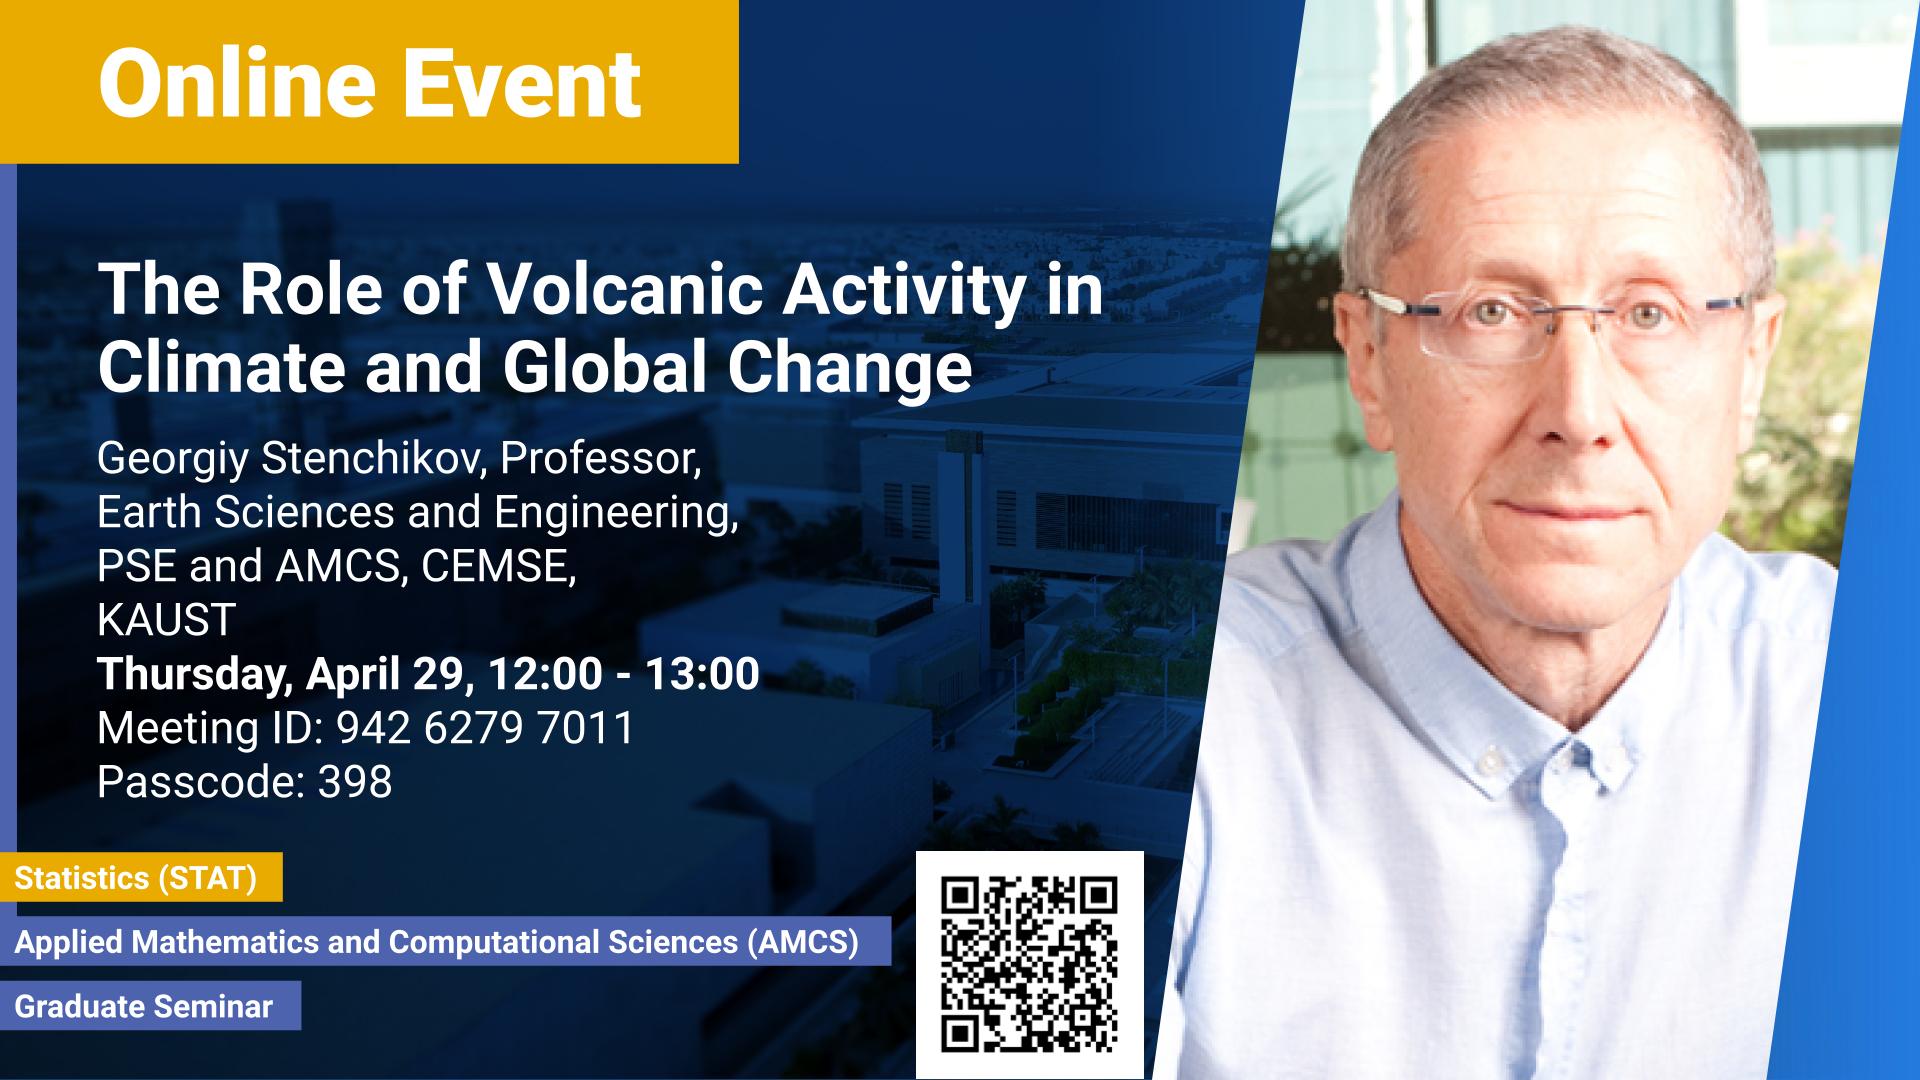 KAUST-CEMSE-AMCS-STAT-Graduate-Seminar-Georgiy-Stenchikov-The Role-of-Volcanic-Activity-in-Climate-and-Global-Change.jpg